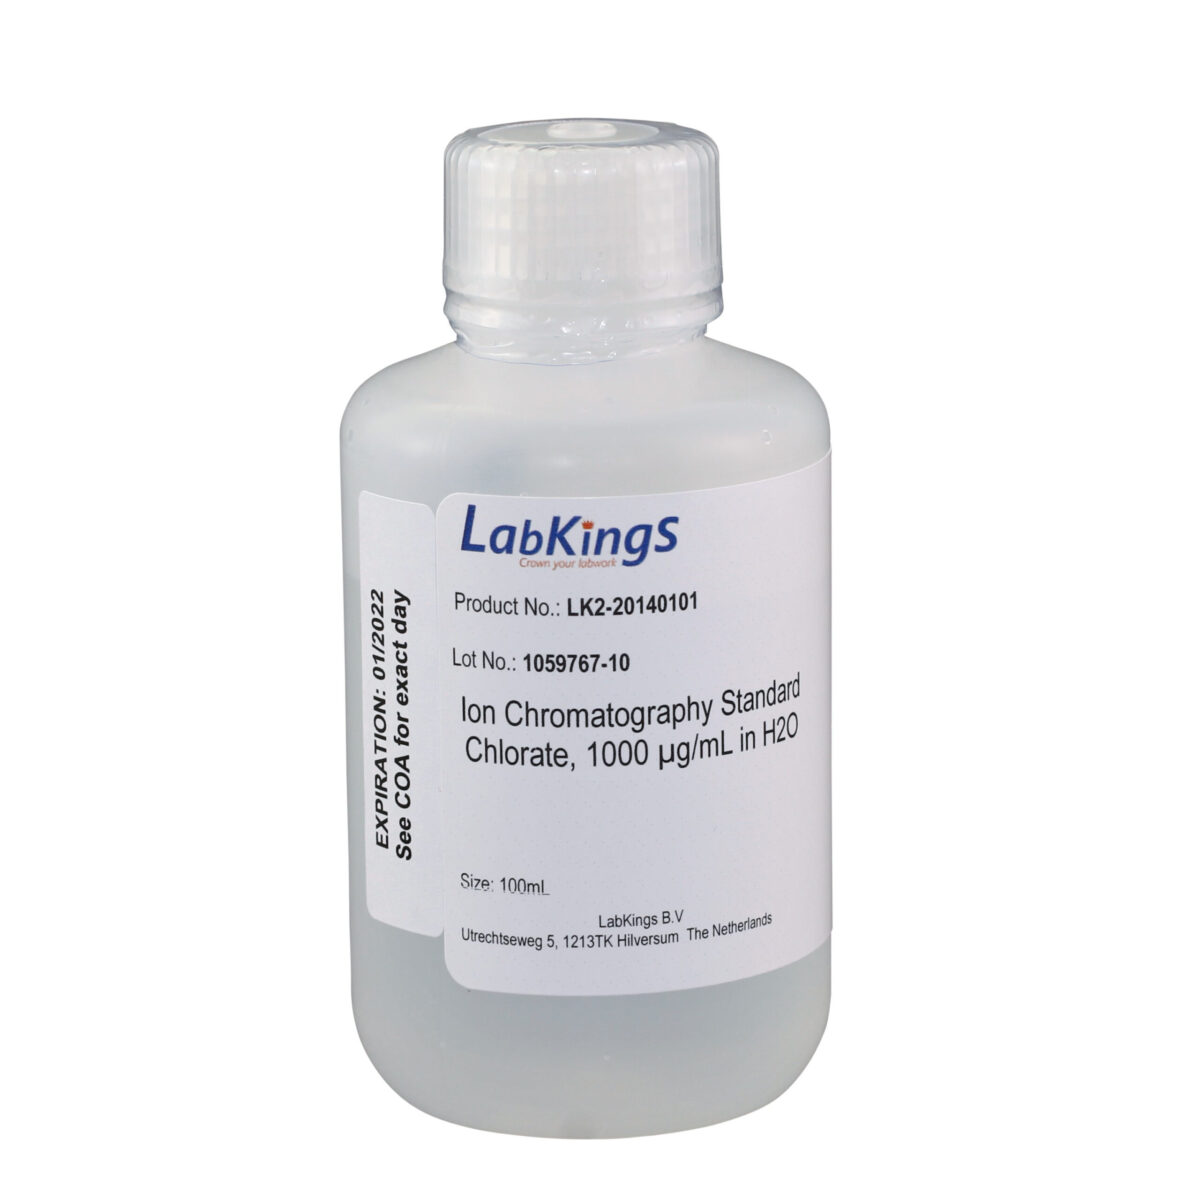 Chlorate, 1000 mg/L, Ion Chromatography Standard, in H2O, 100mL